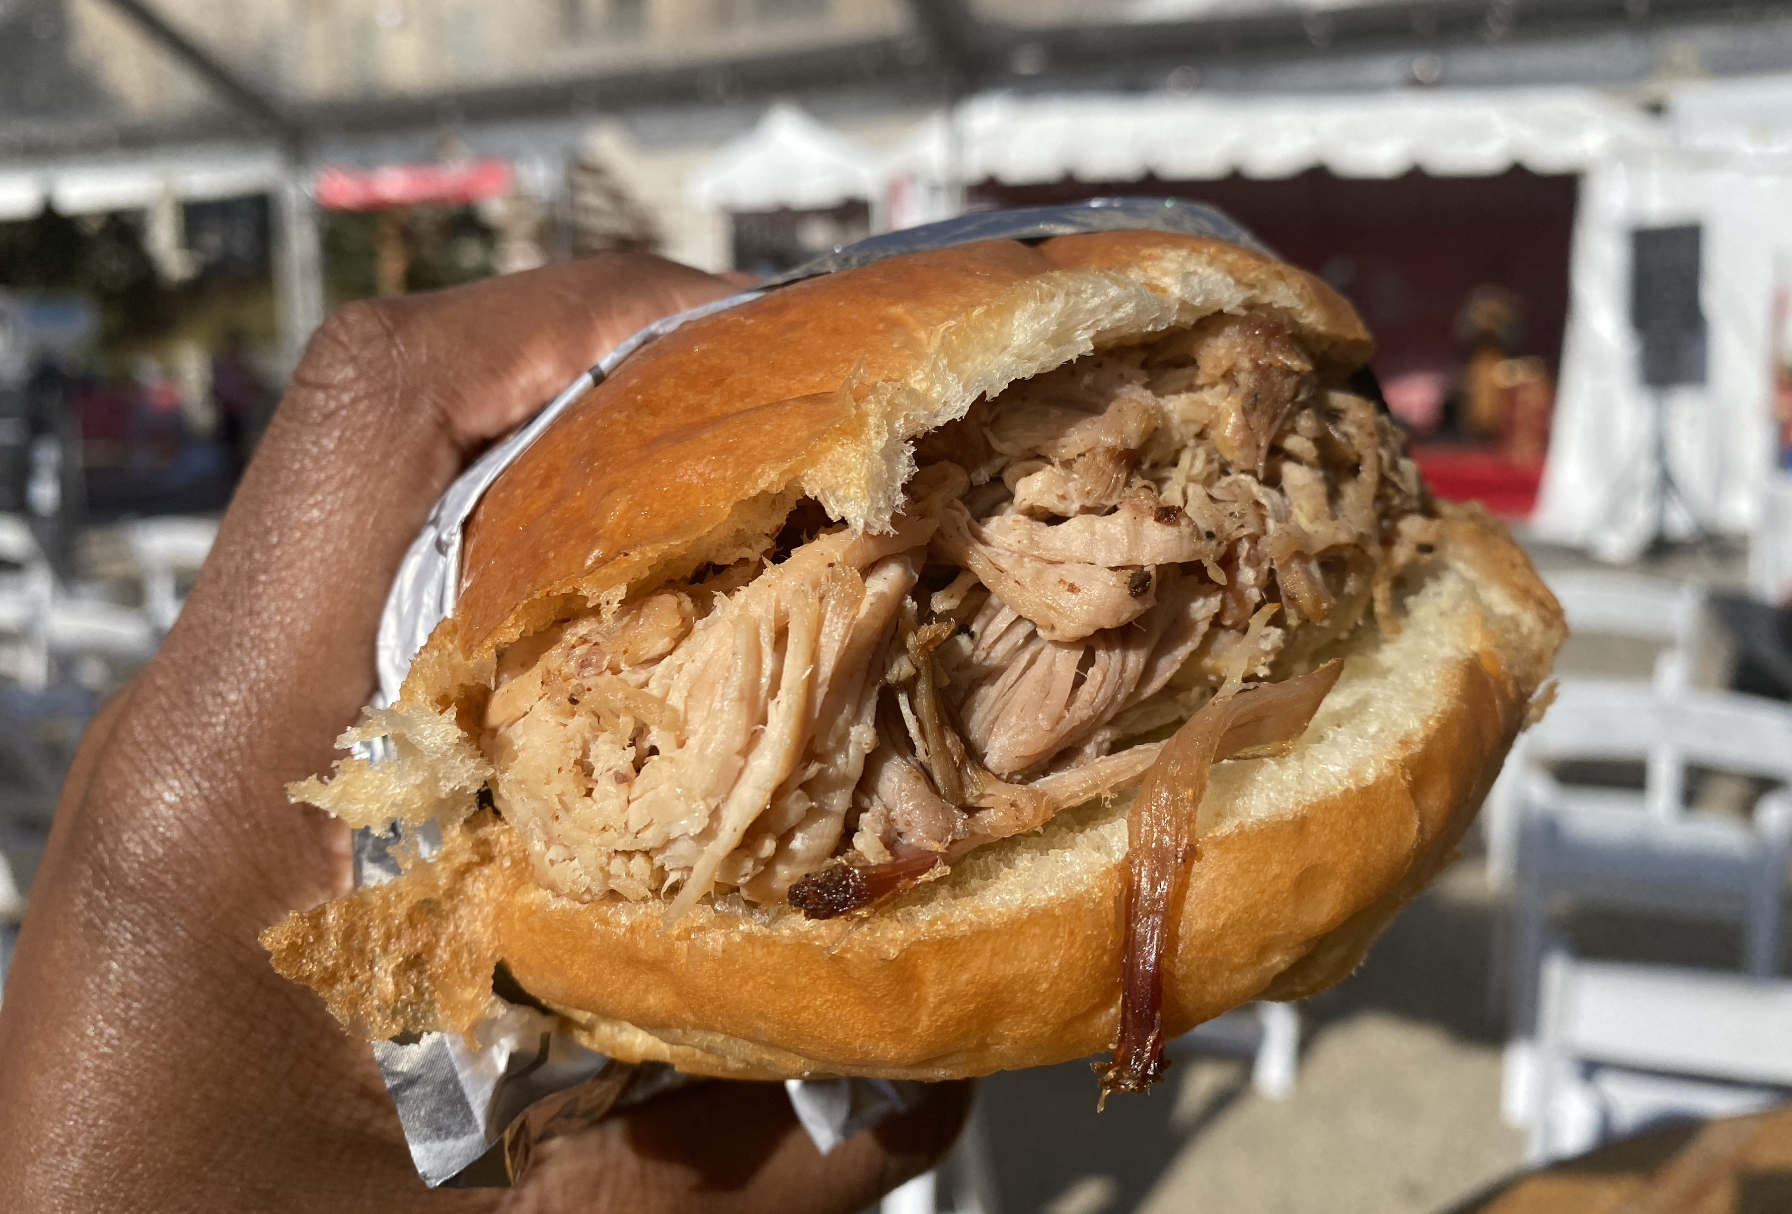 A pulled pork sandwich from old blue BBQ.